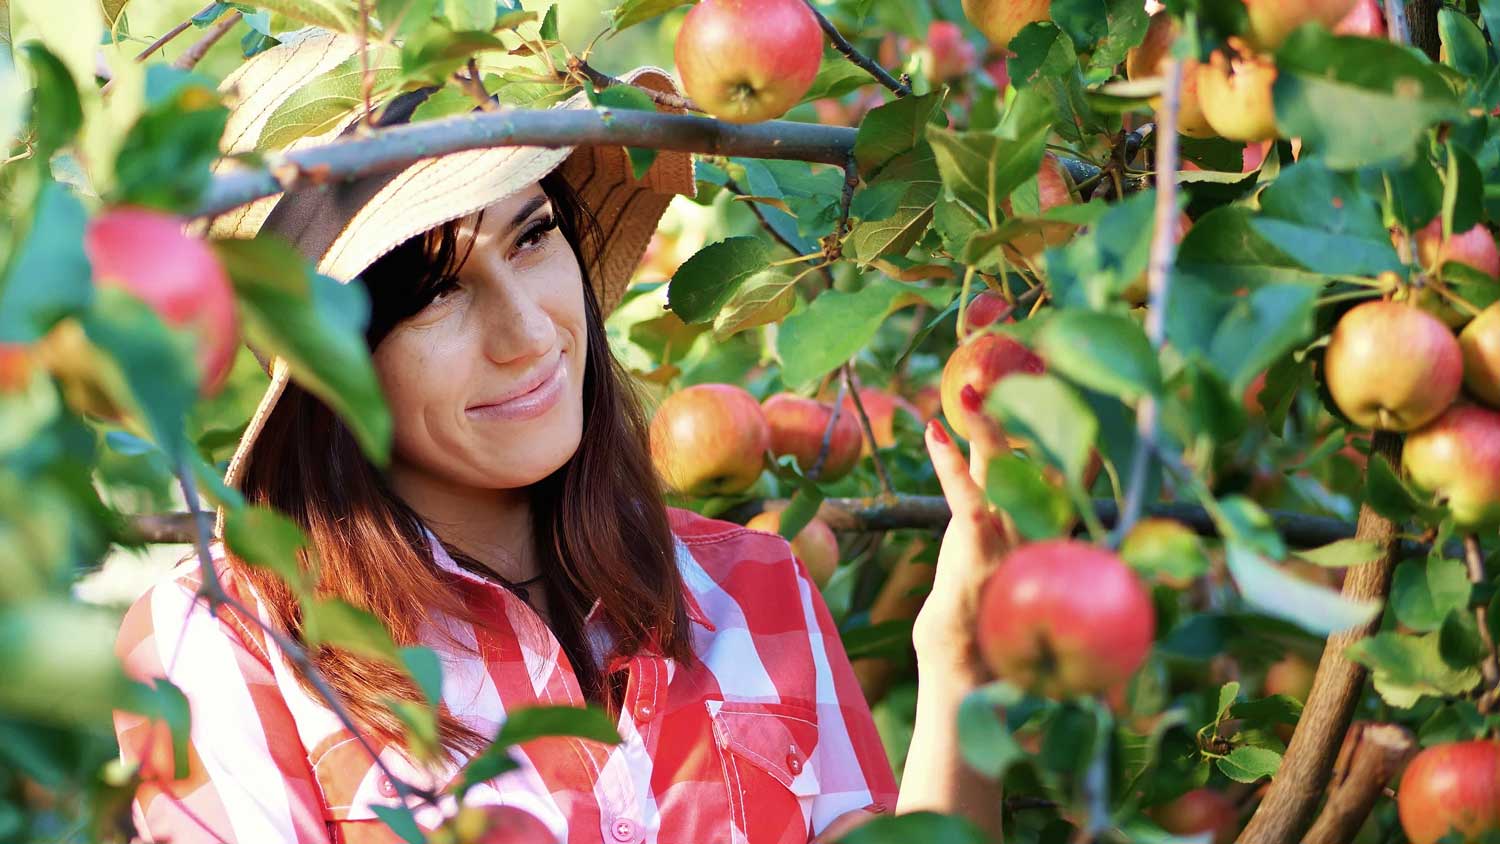 Woman picking apples in orchard.